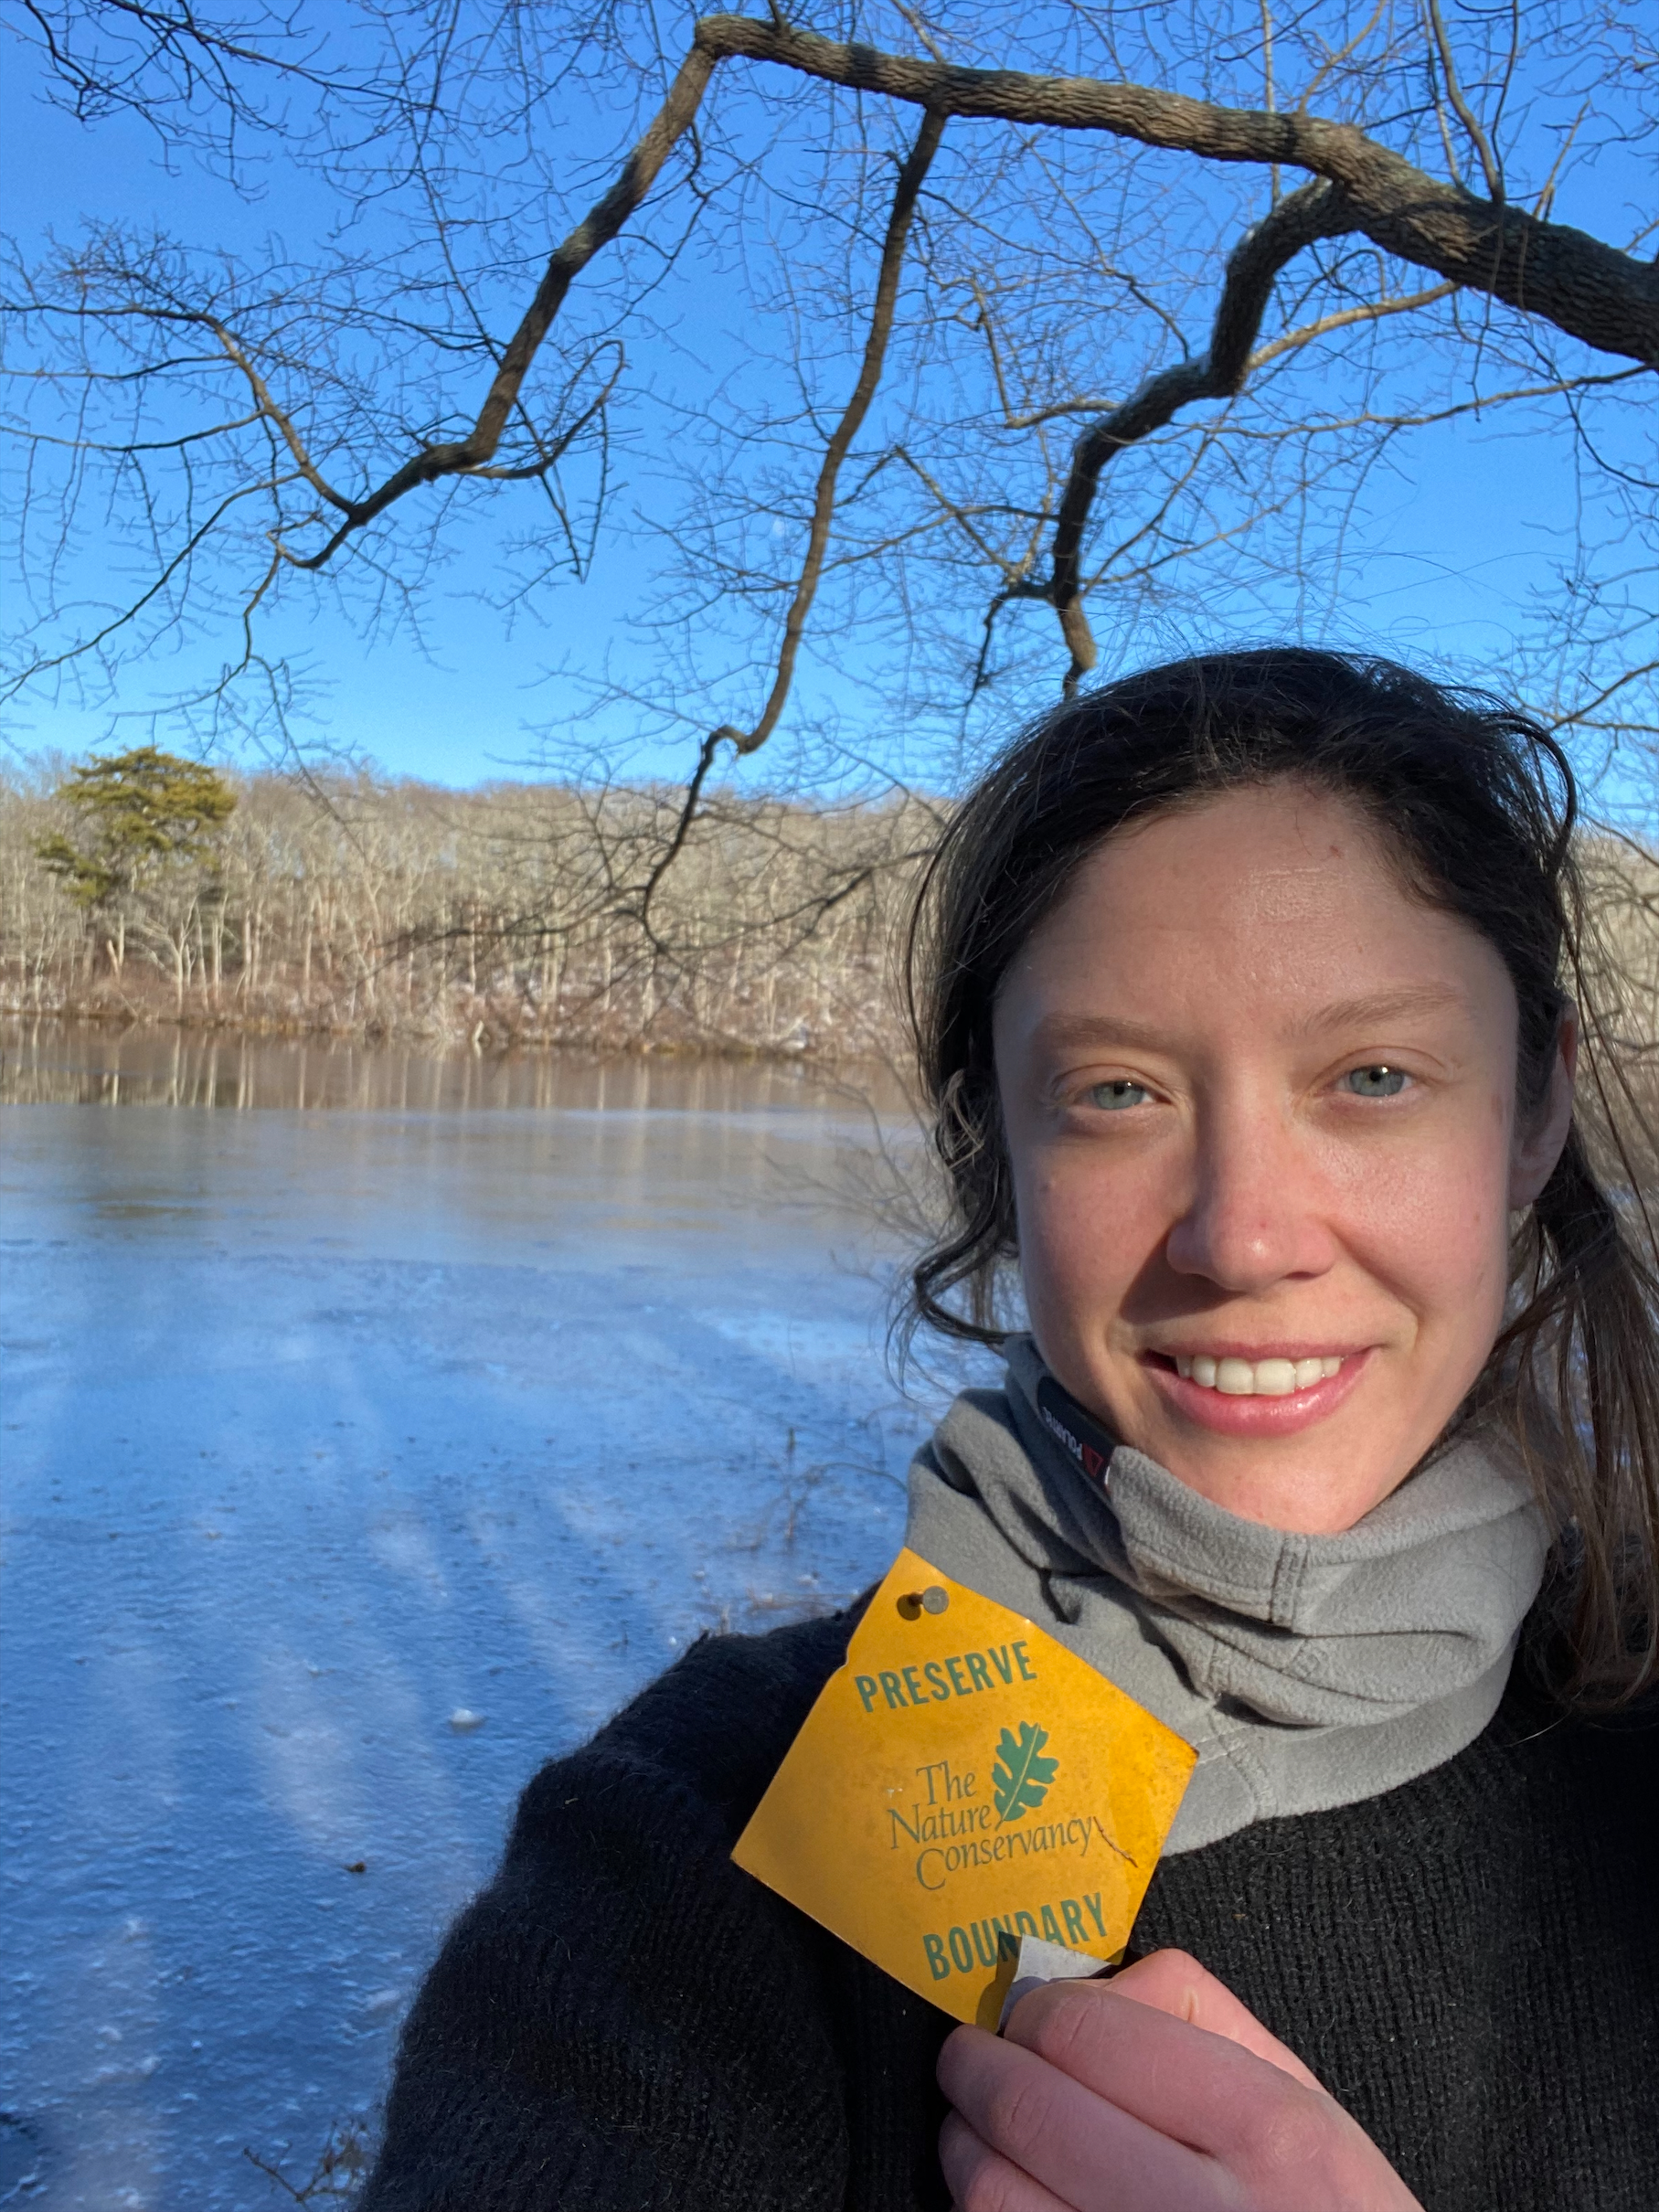 A selfie of Bekah Myers holding up a small TNC preserve boundary sign in front of a pond.